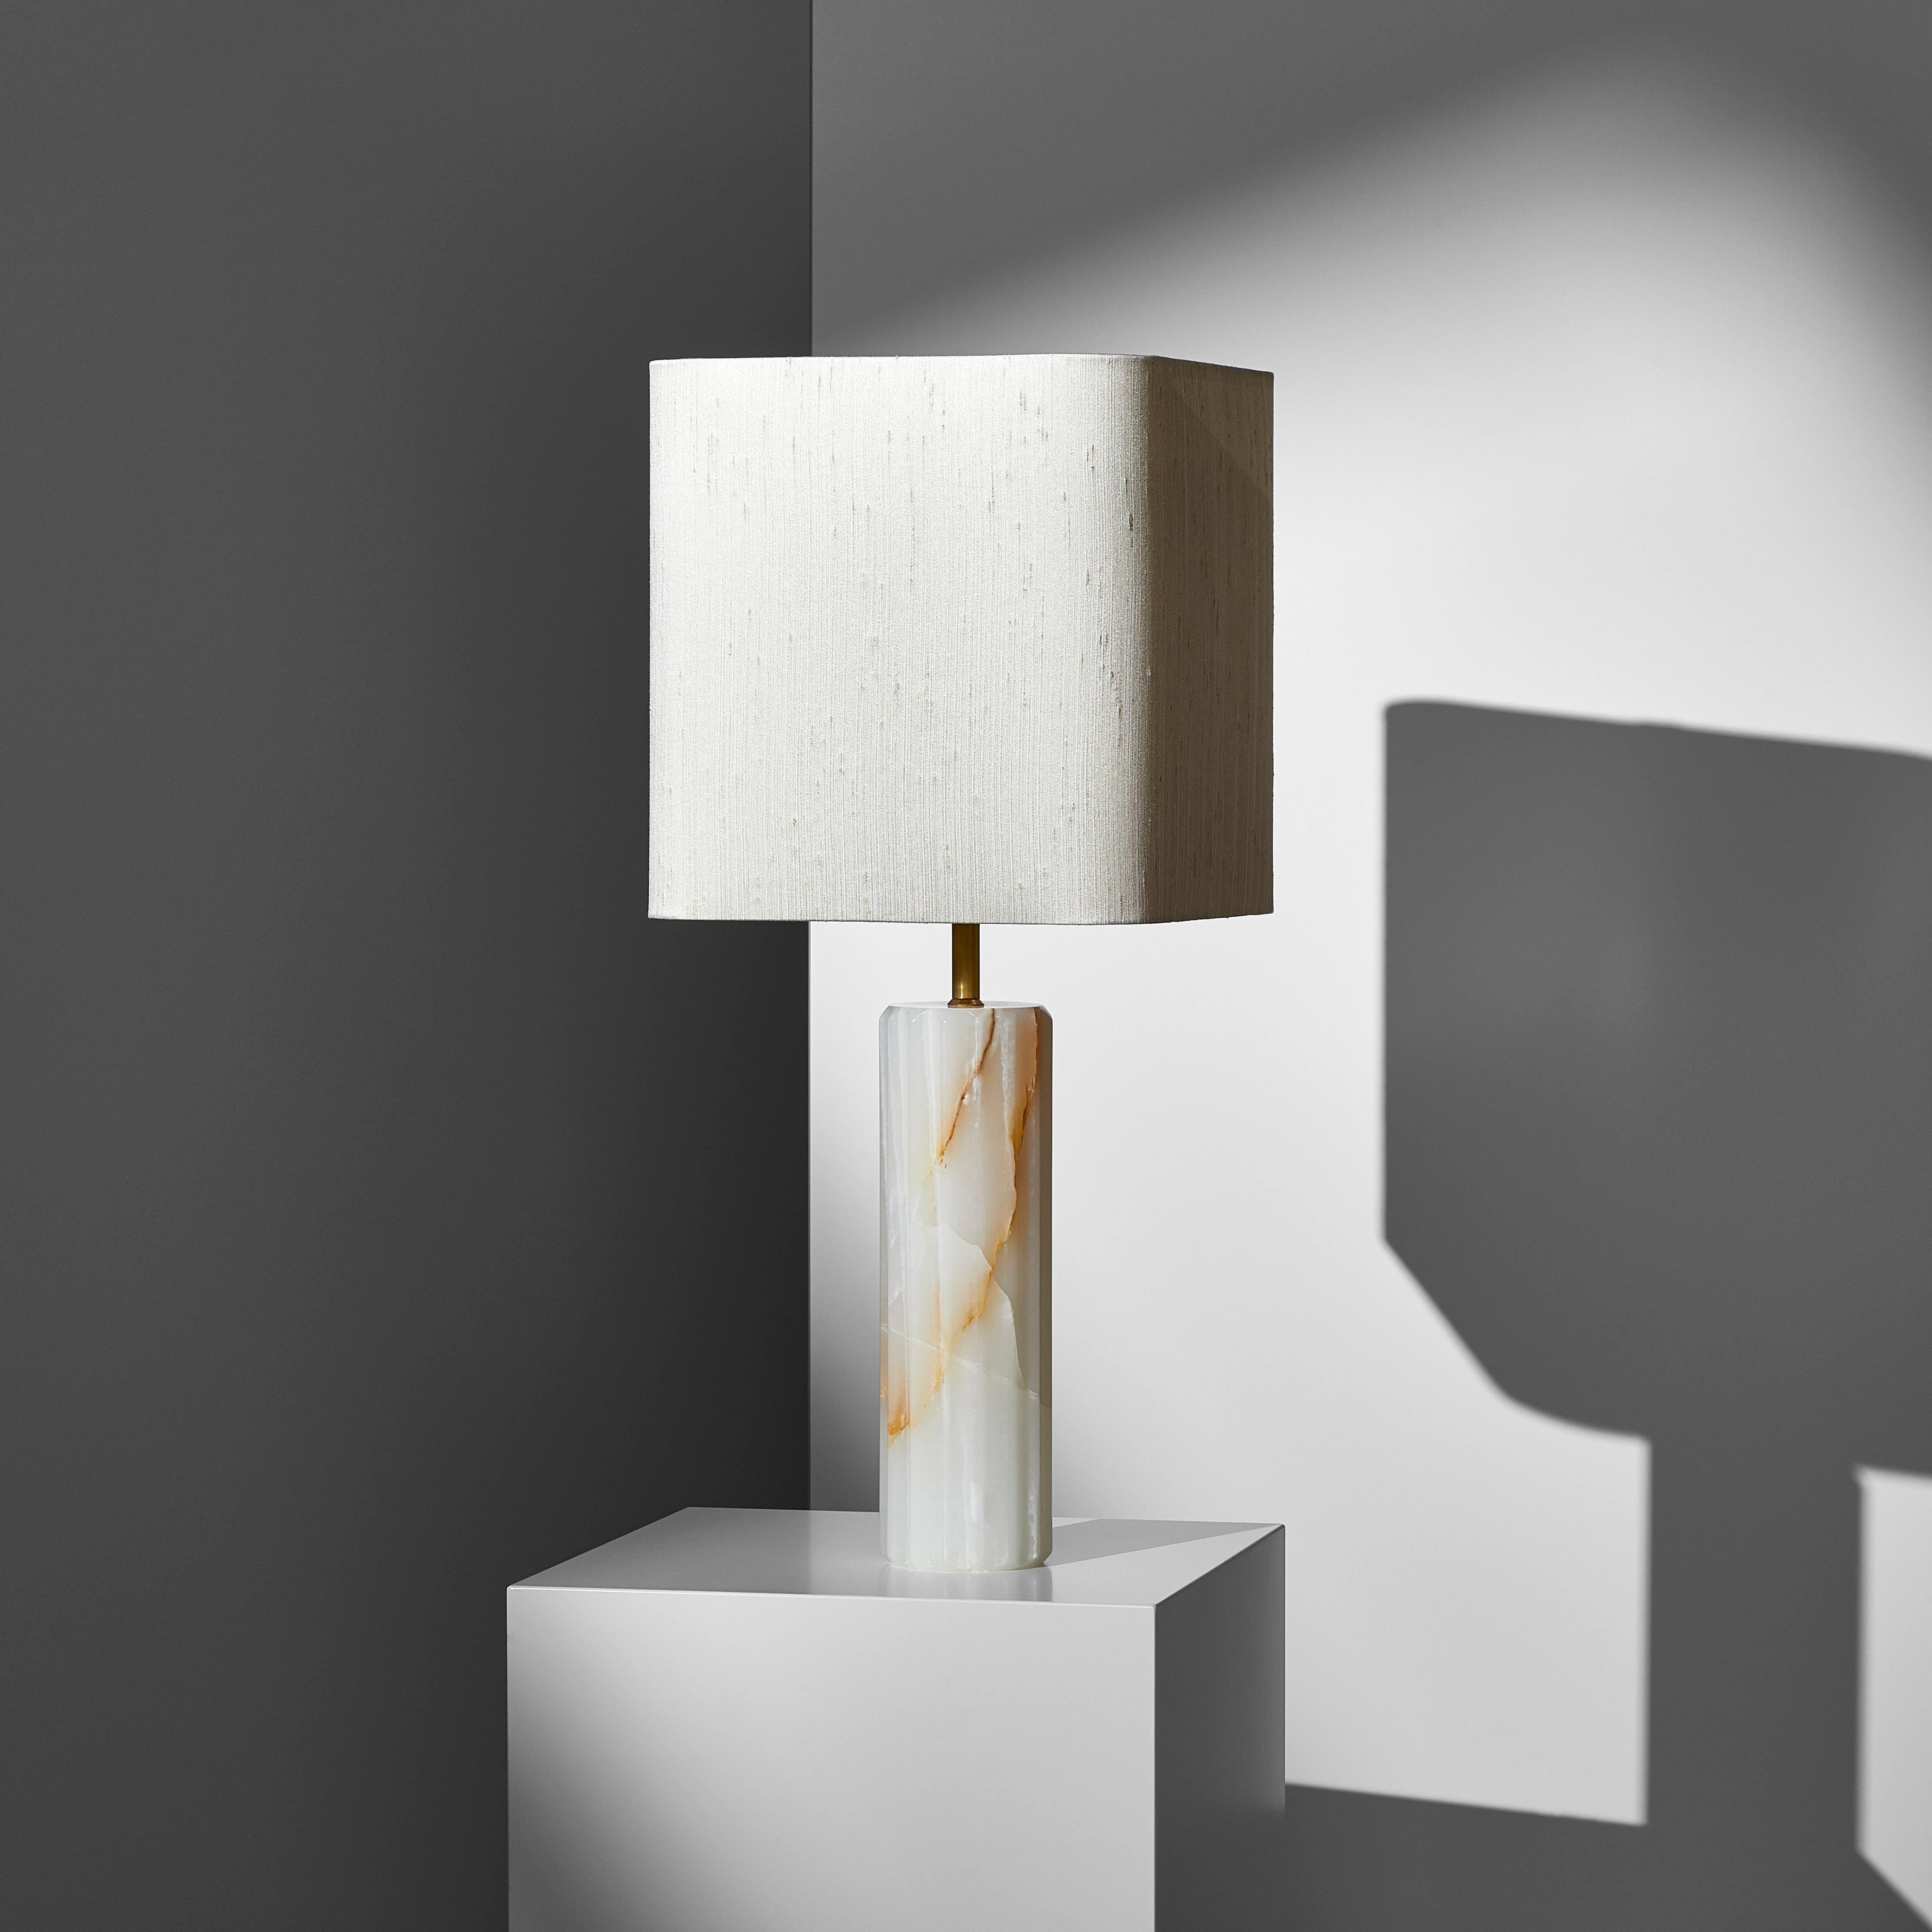 Set of 2 proud table lamp by Lisette Rützou
Dimensions: 24 x H 55 cm
Materials: White Onyx

All our lamps can be wired according to each country. If sold to the USA it will be wired for the USA for instance.

 Lisette Rützou’s design is